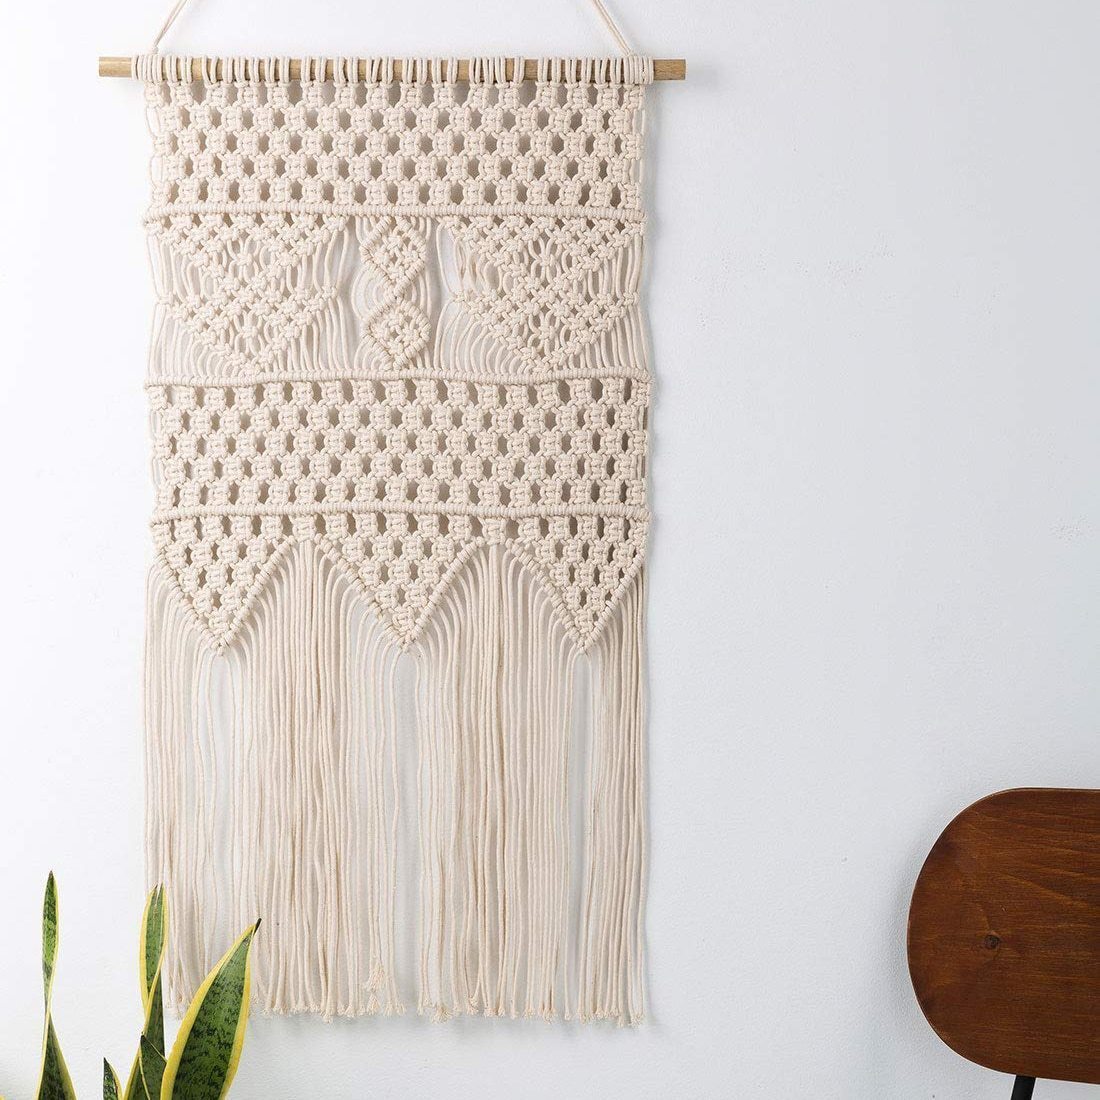 Macrame Wall Hanging EthnicTapestry - Nordic Side - 